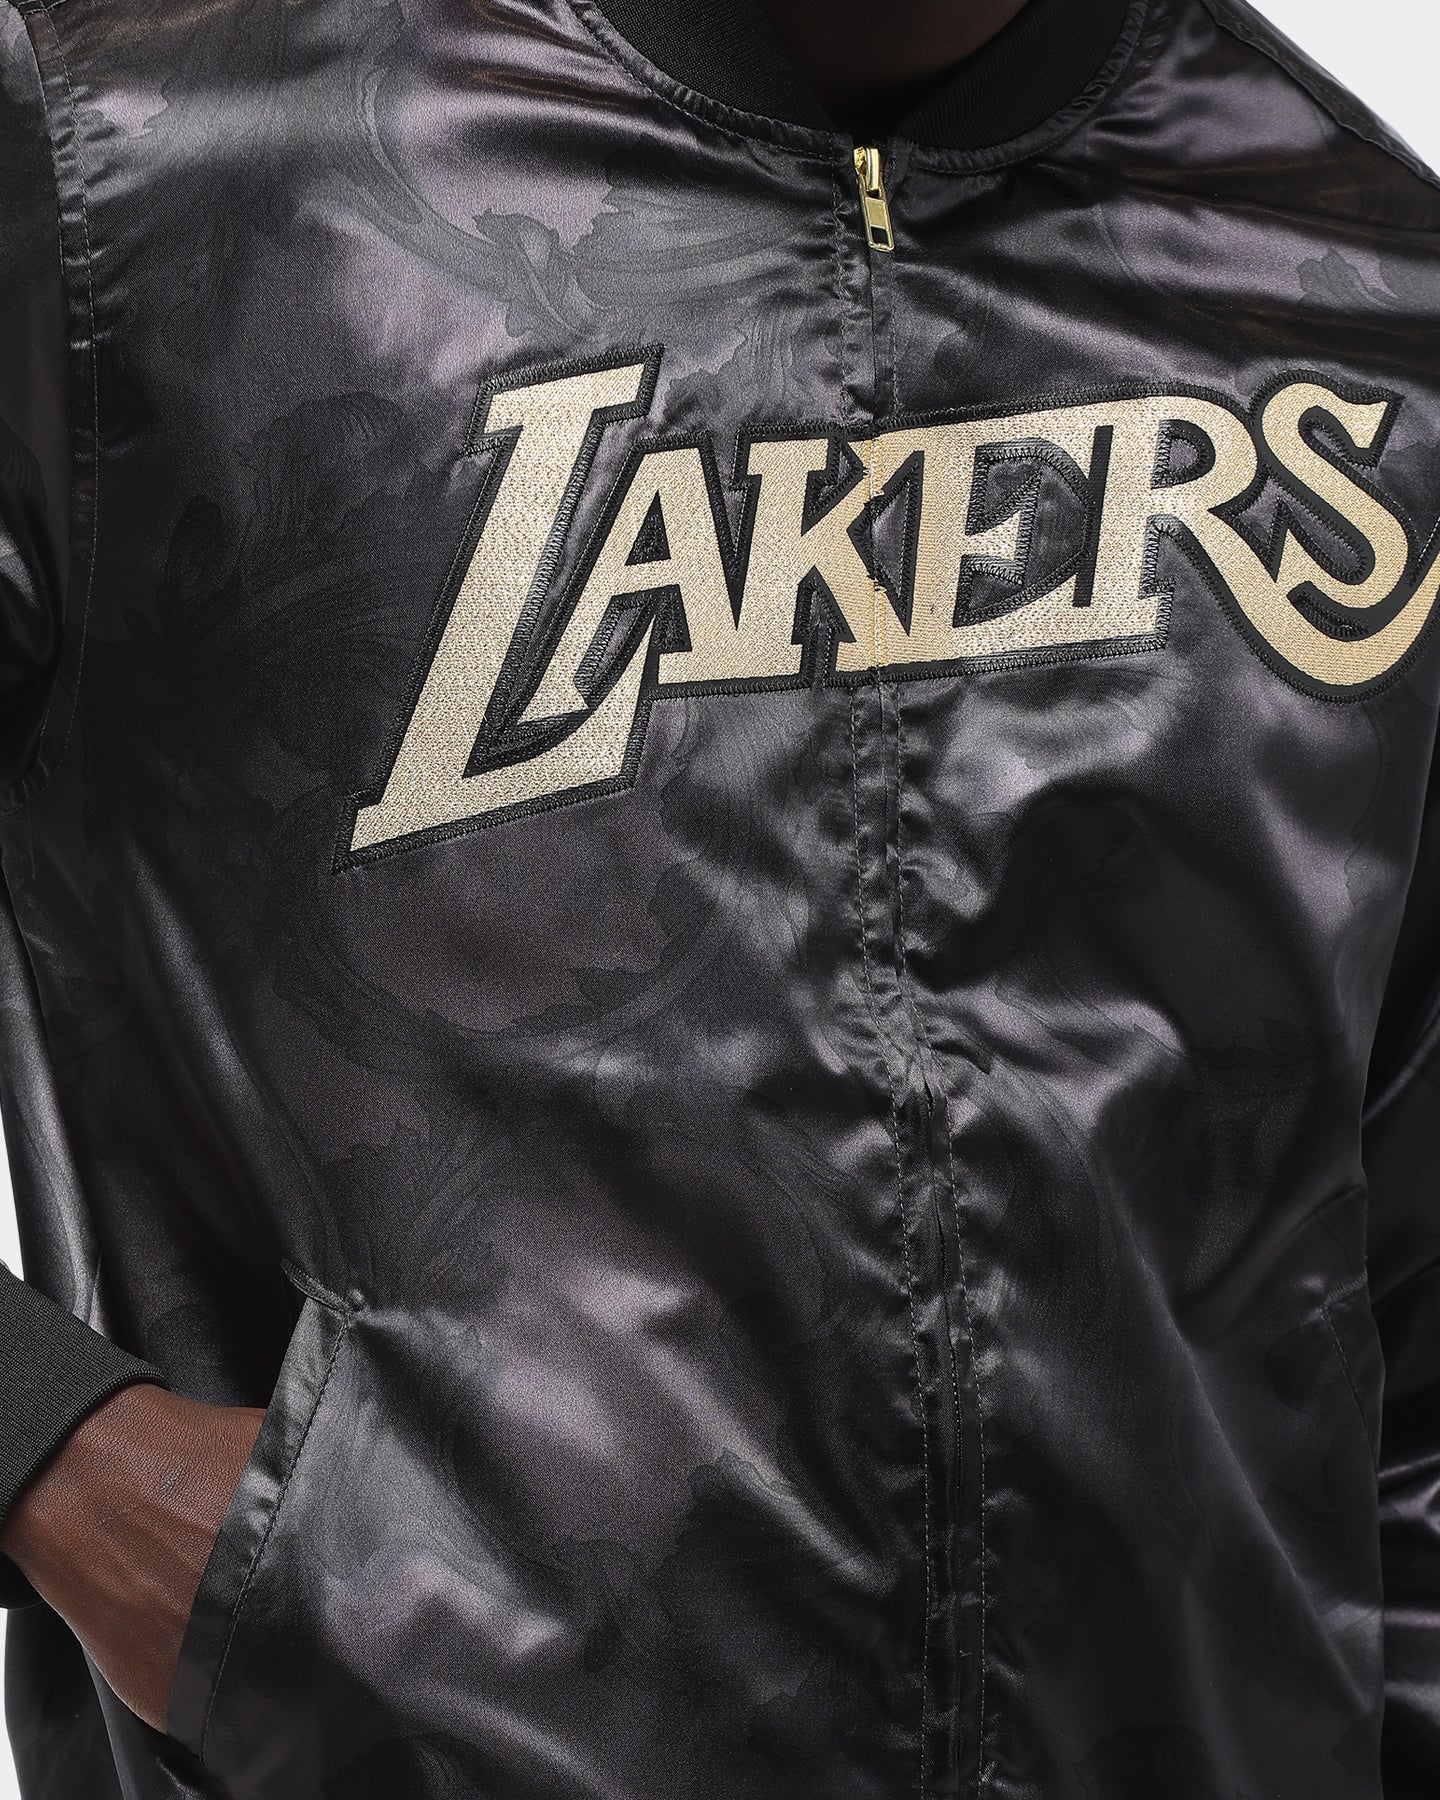 lakers gold jacket